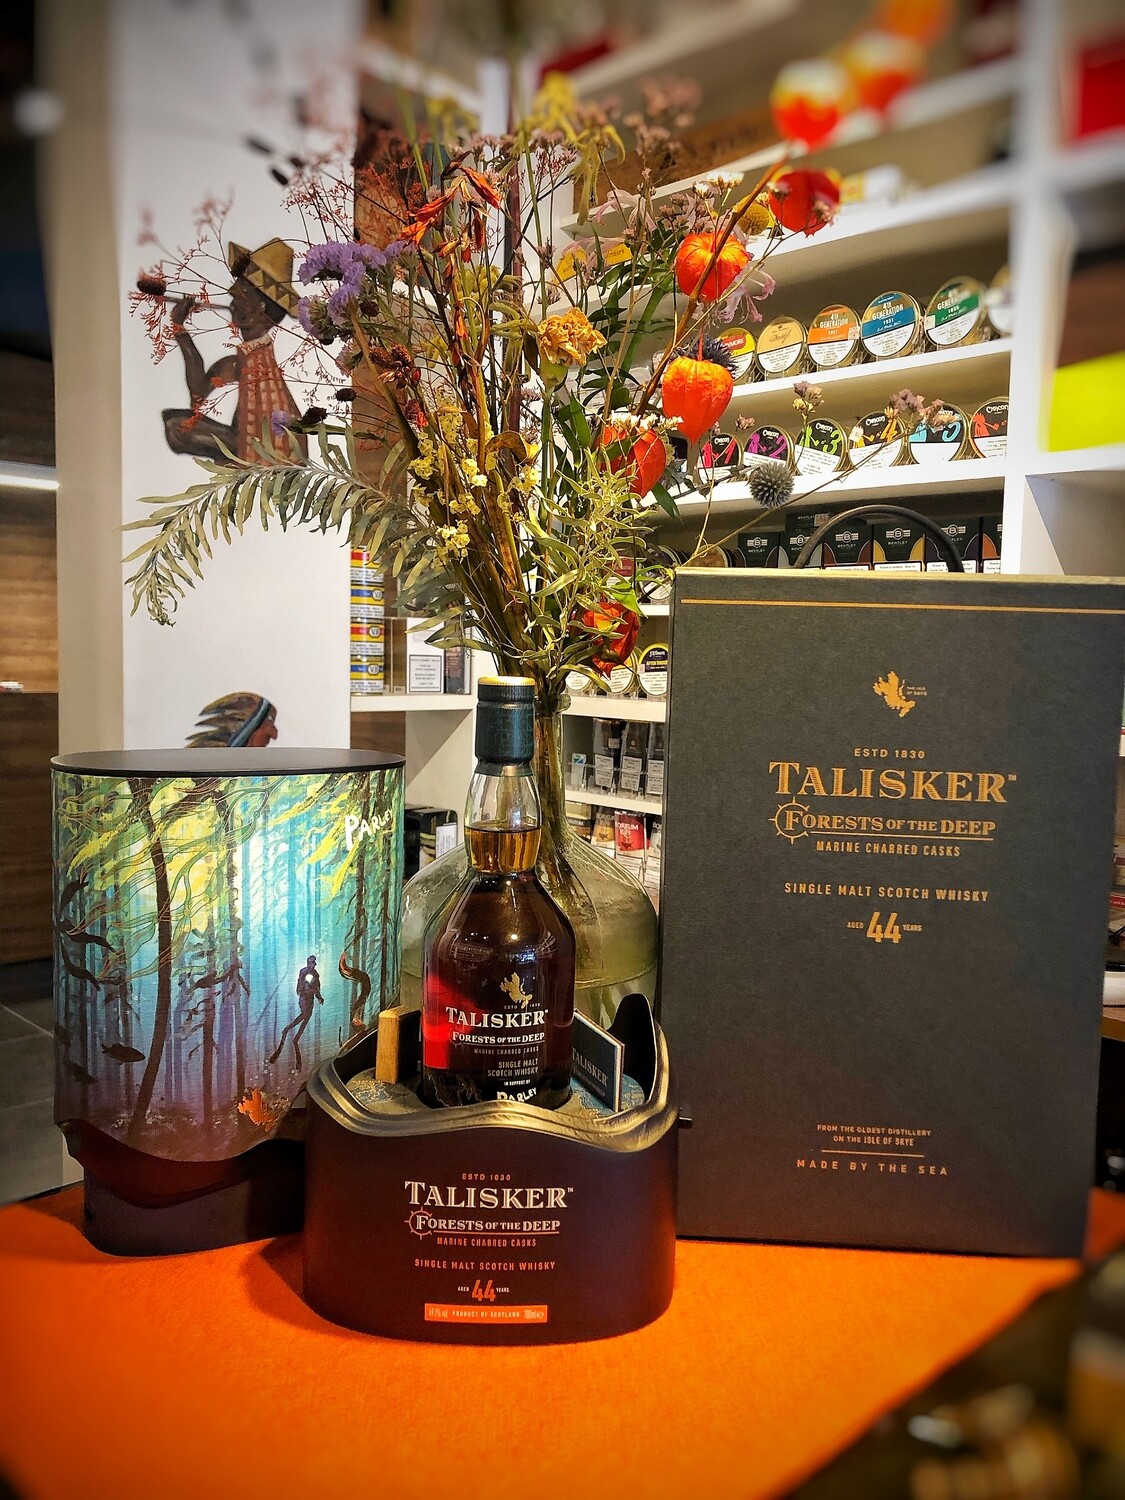 Talisker 44y Forests of the deep 